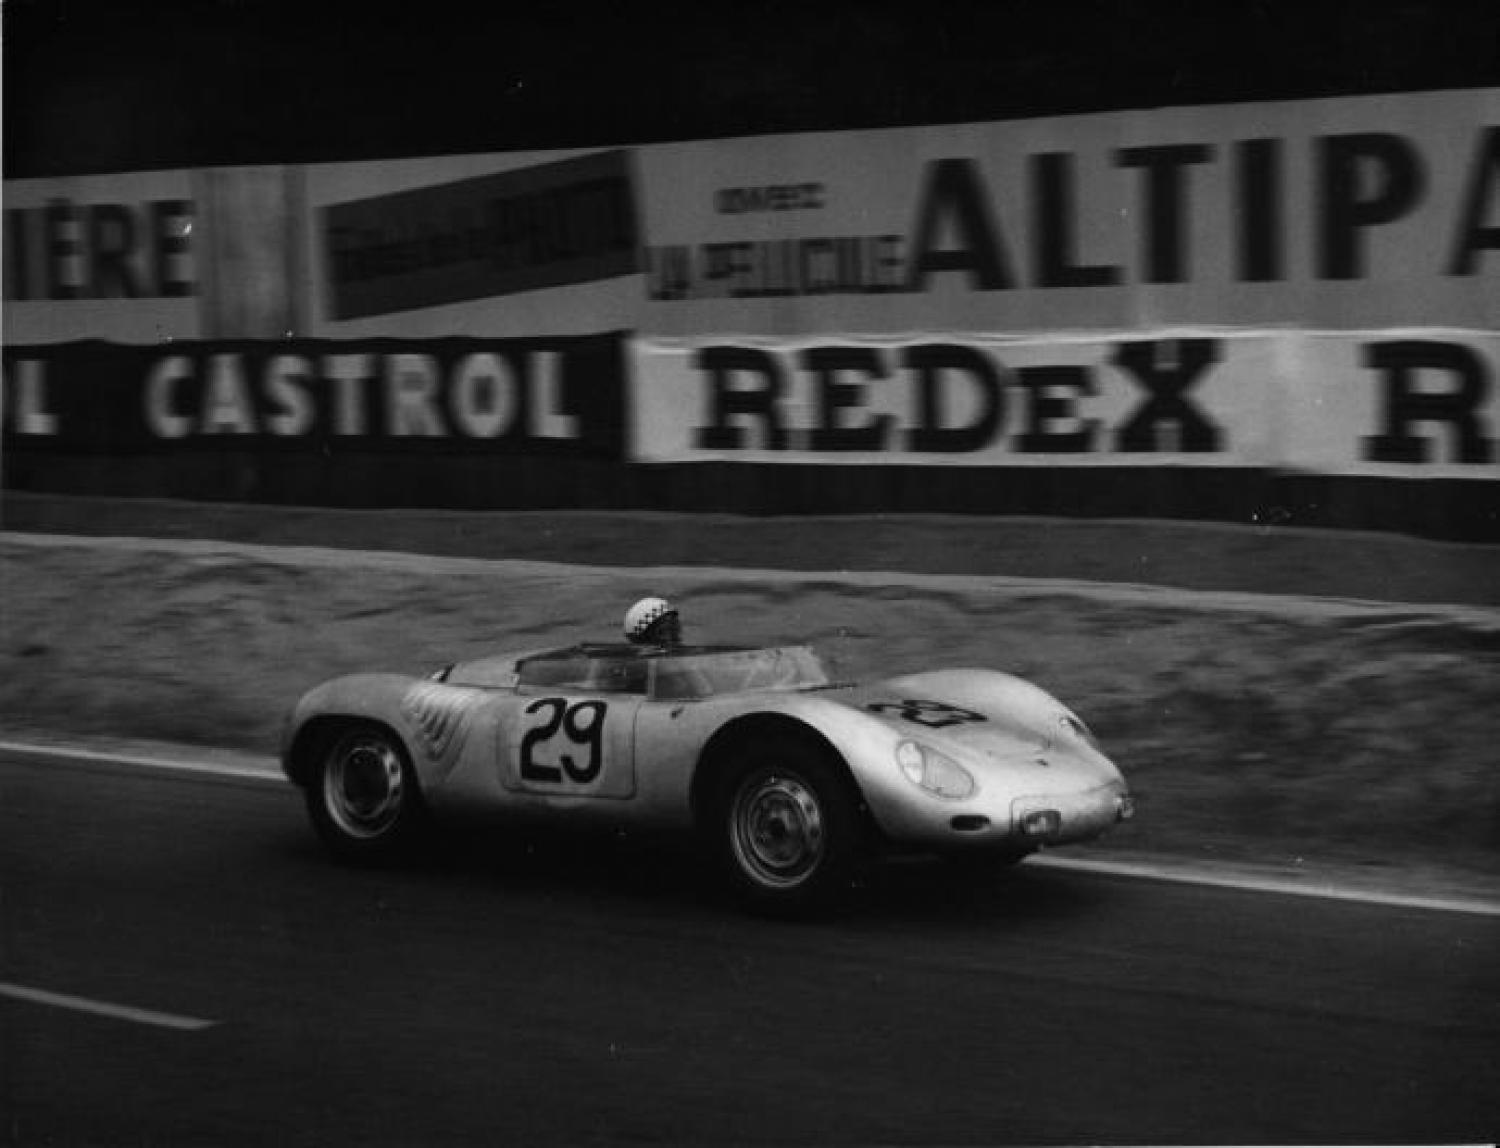 Porsche at the 24 Hours of Le Mans: the big moments from 1951-1969